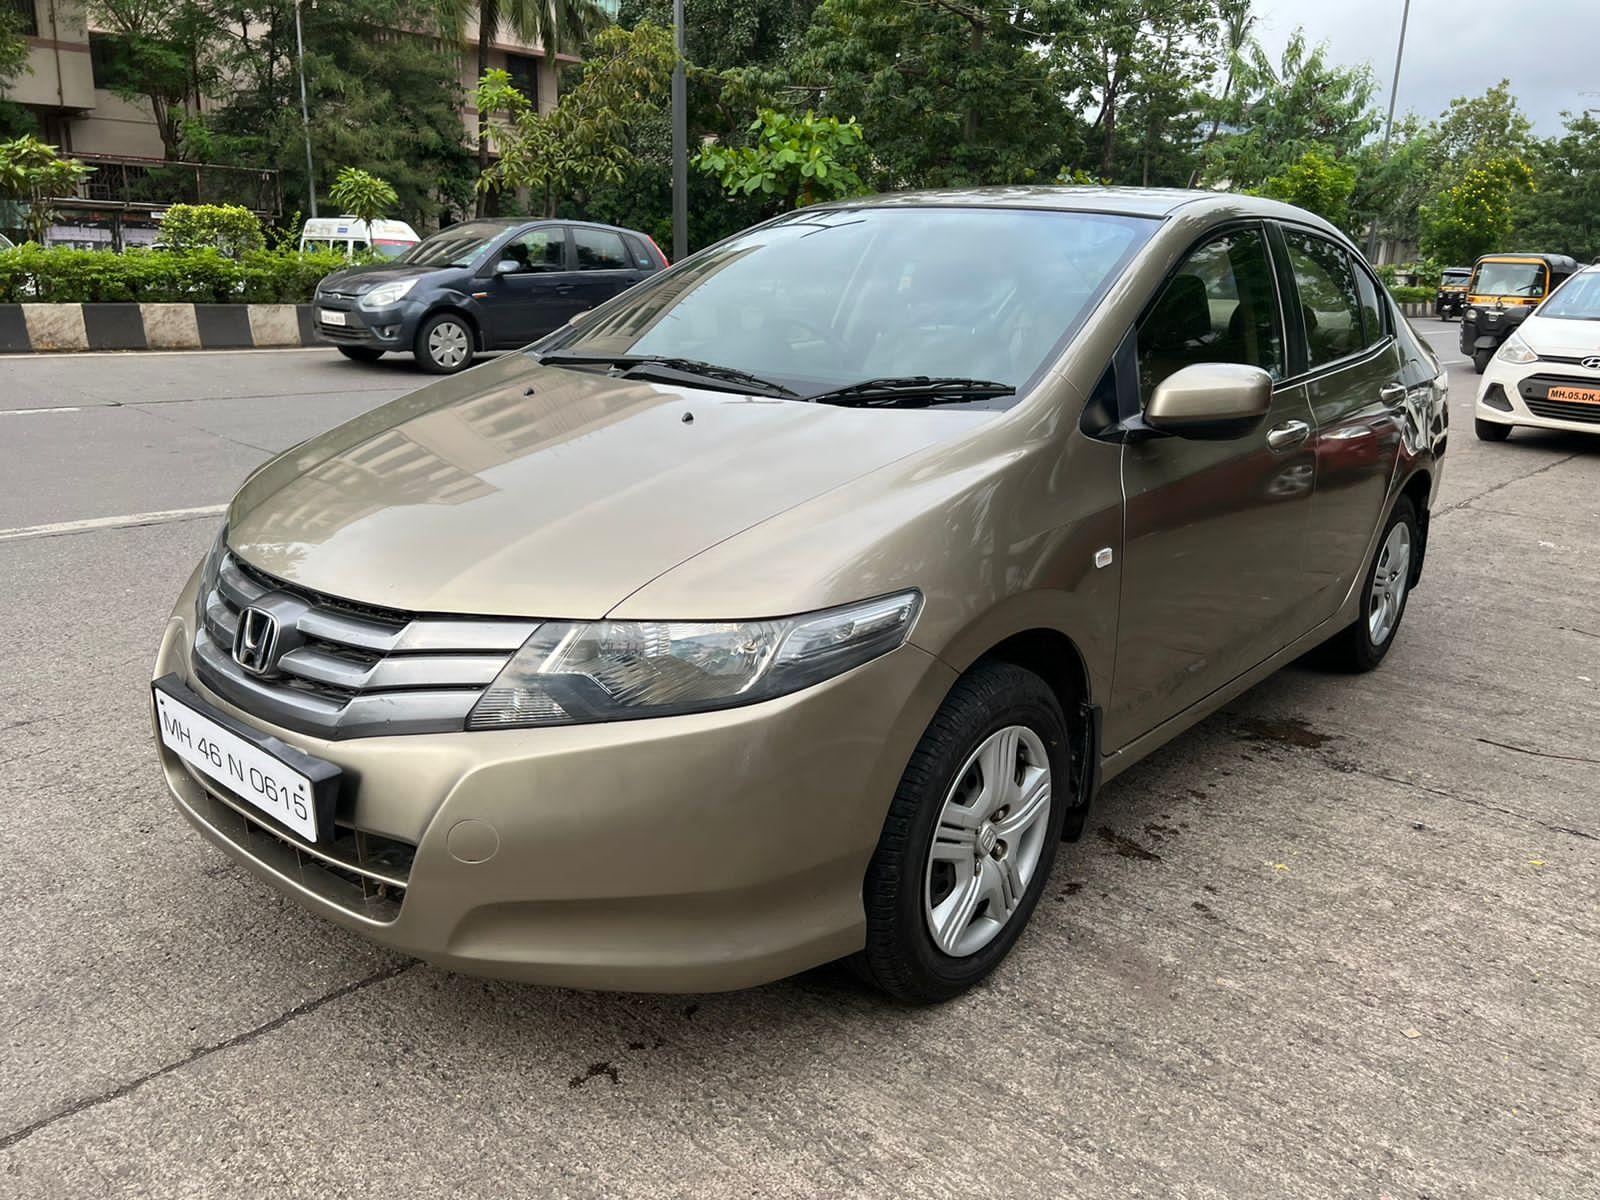 Used 2011 Honda City 1.5 S MT for sale